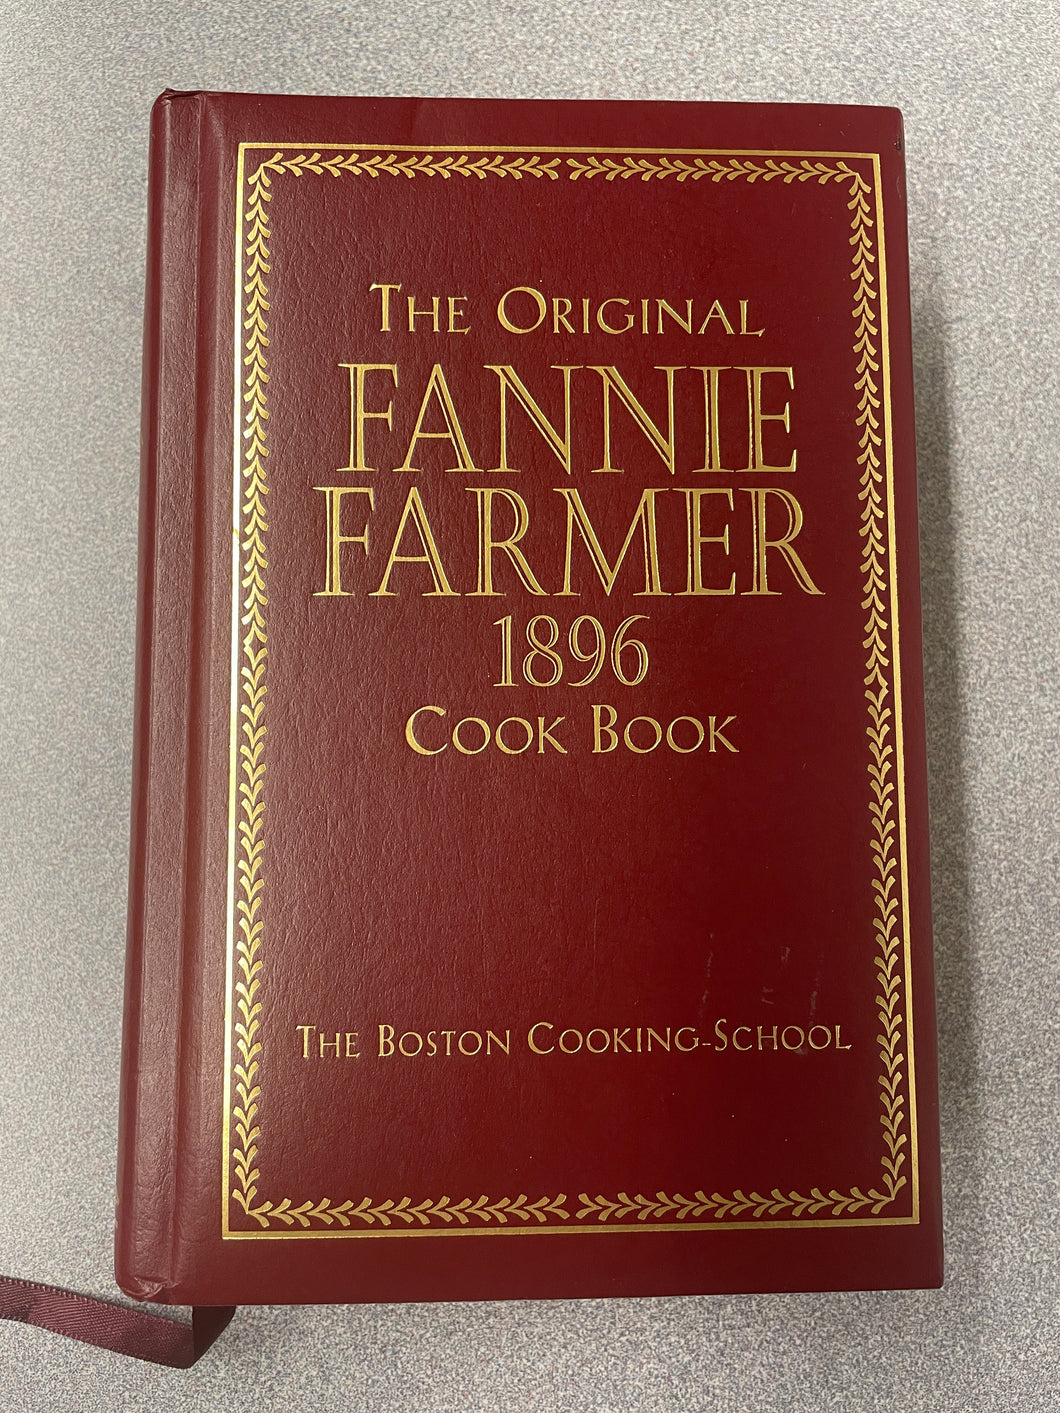 The Original Fannie Farmer 1896 Cook Book: The Boston Cooking-School: A Facsimile of the First Edition, Originally published in 1896 [1996] CO 4/24